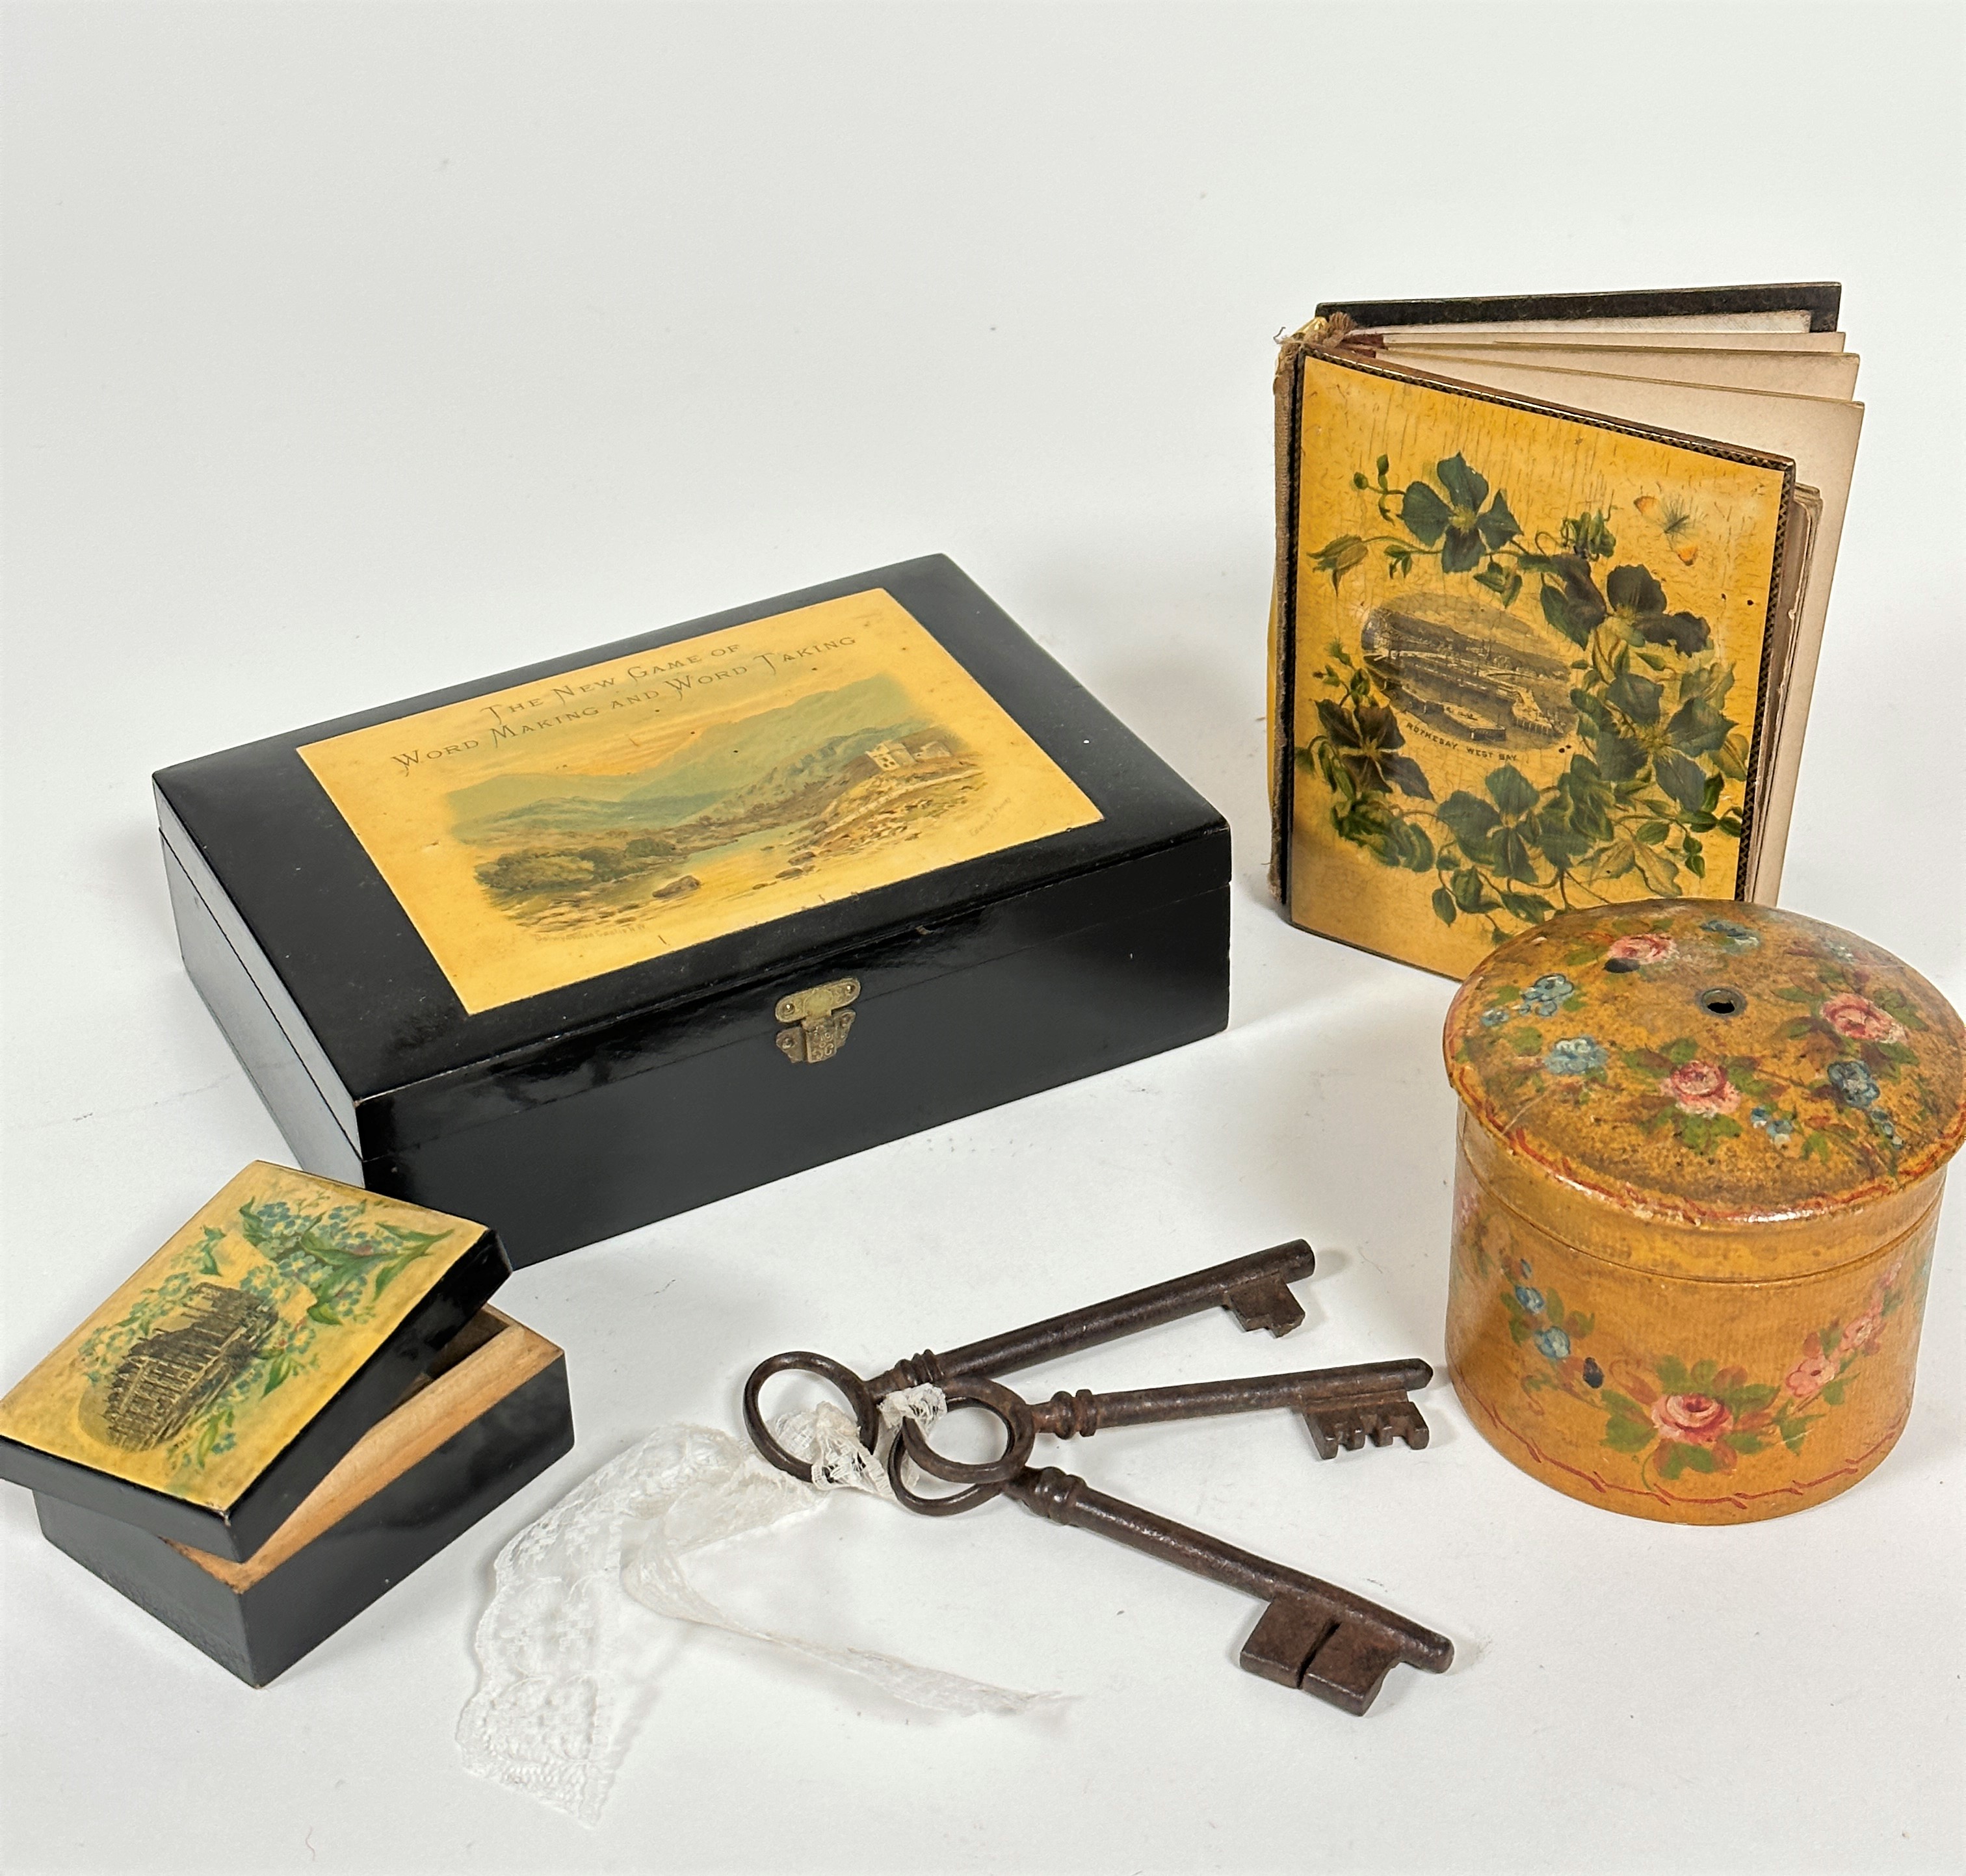 A satinwood ebonised mauchline box, The New Game of Word, Taking (4.5cm x 16.5cm x 11.5cm), a